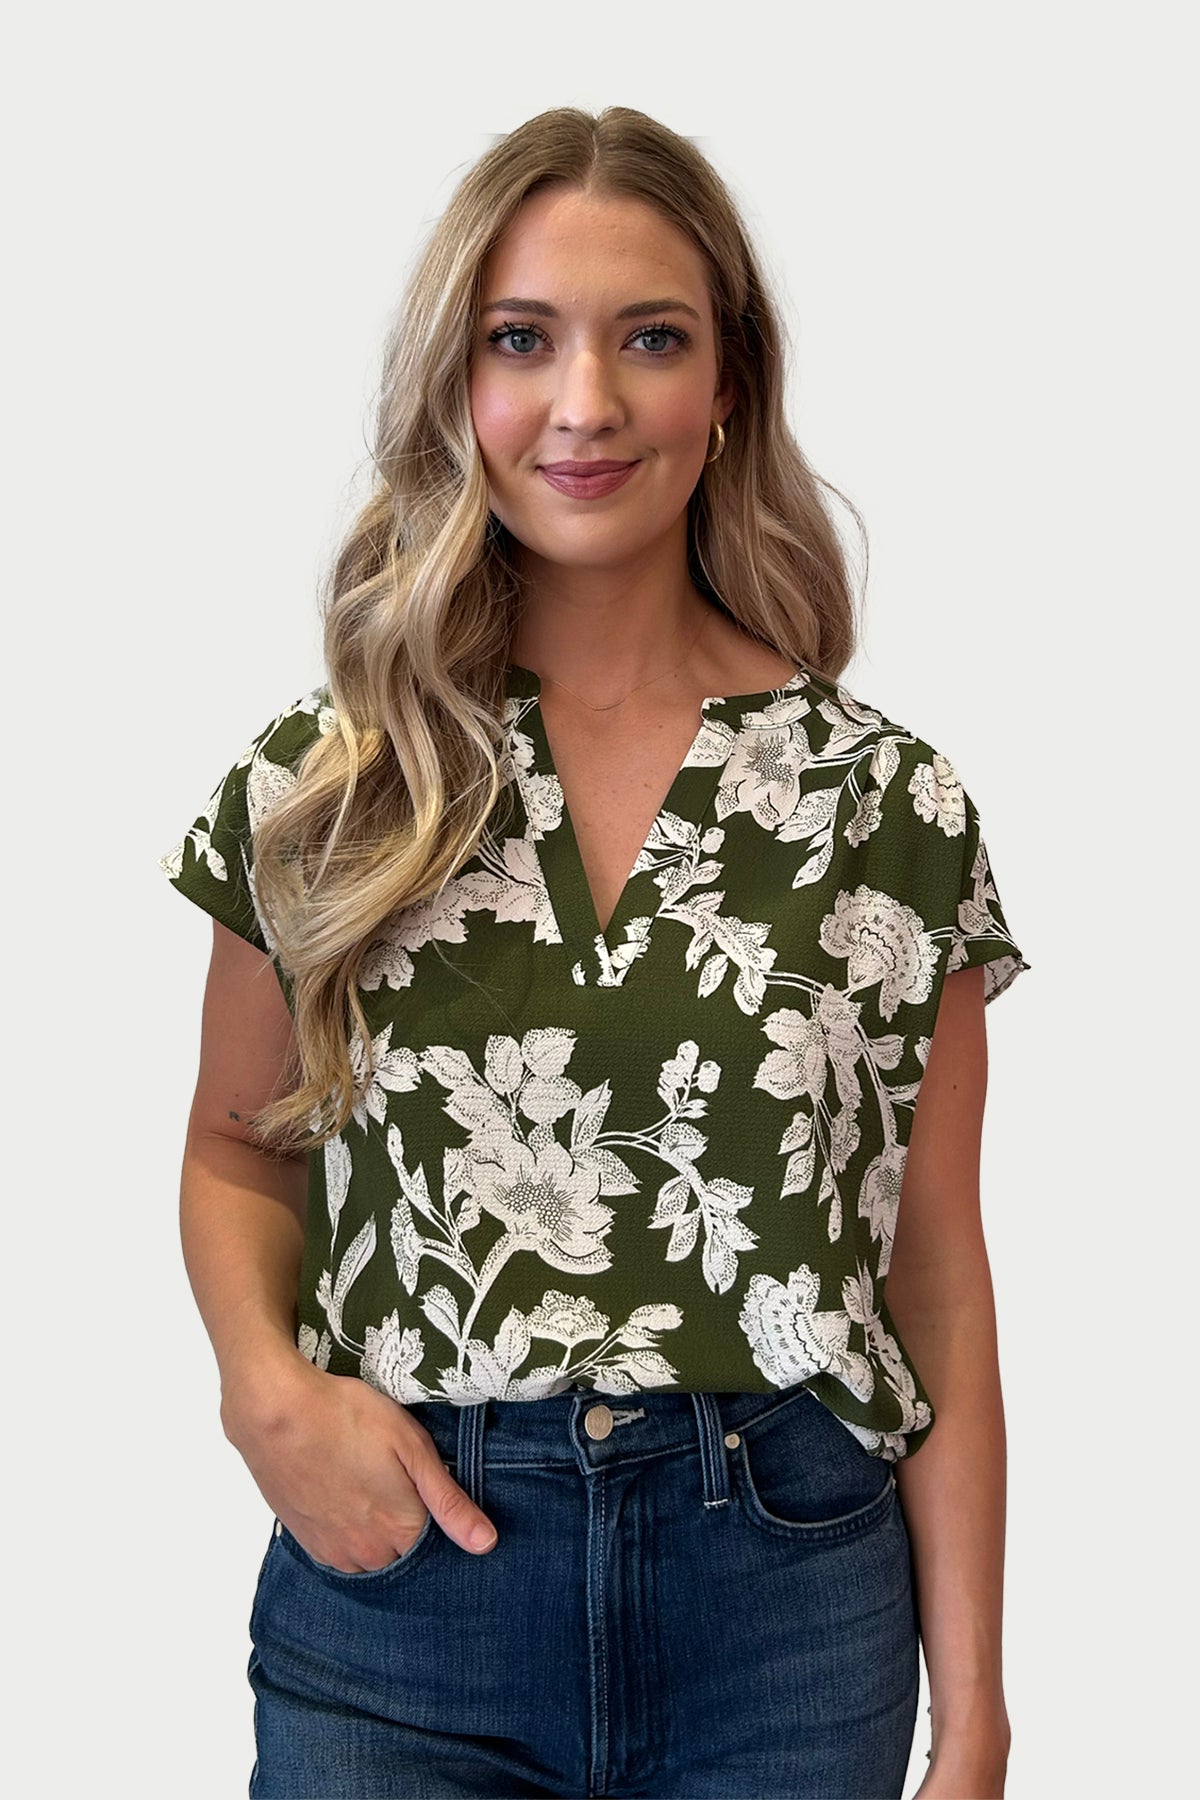 Olive/White Floral Printed Top